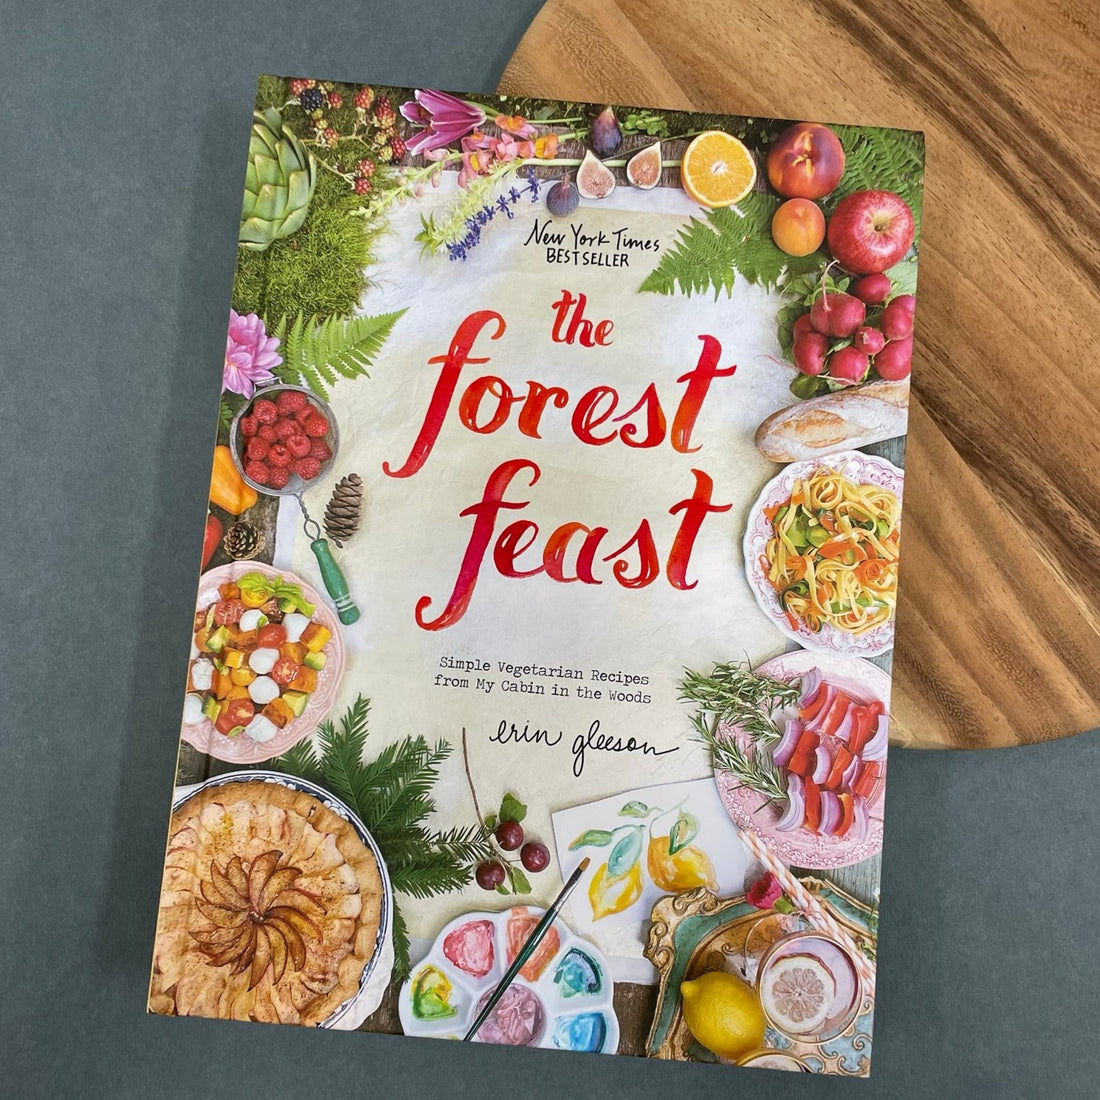 Forest Feast: Simple Vegetarian Recipes From My Cabin In The Woods by Erin Gleeson